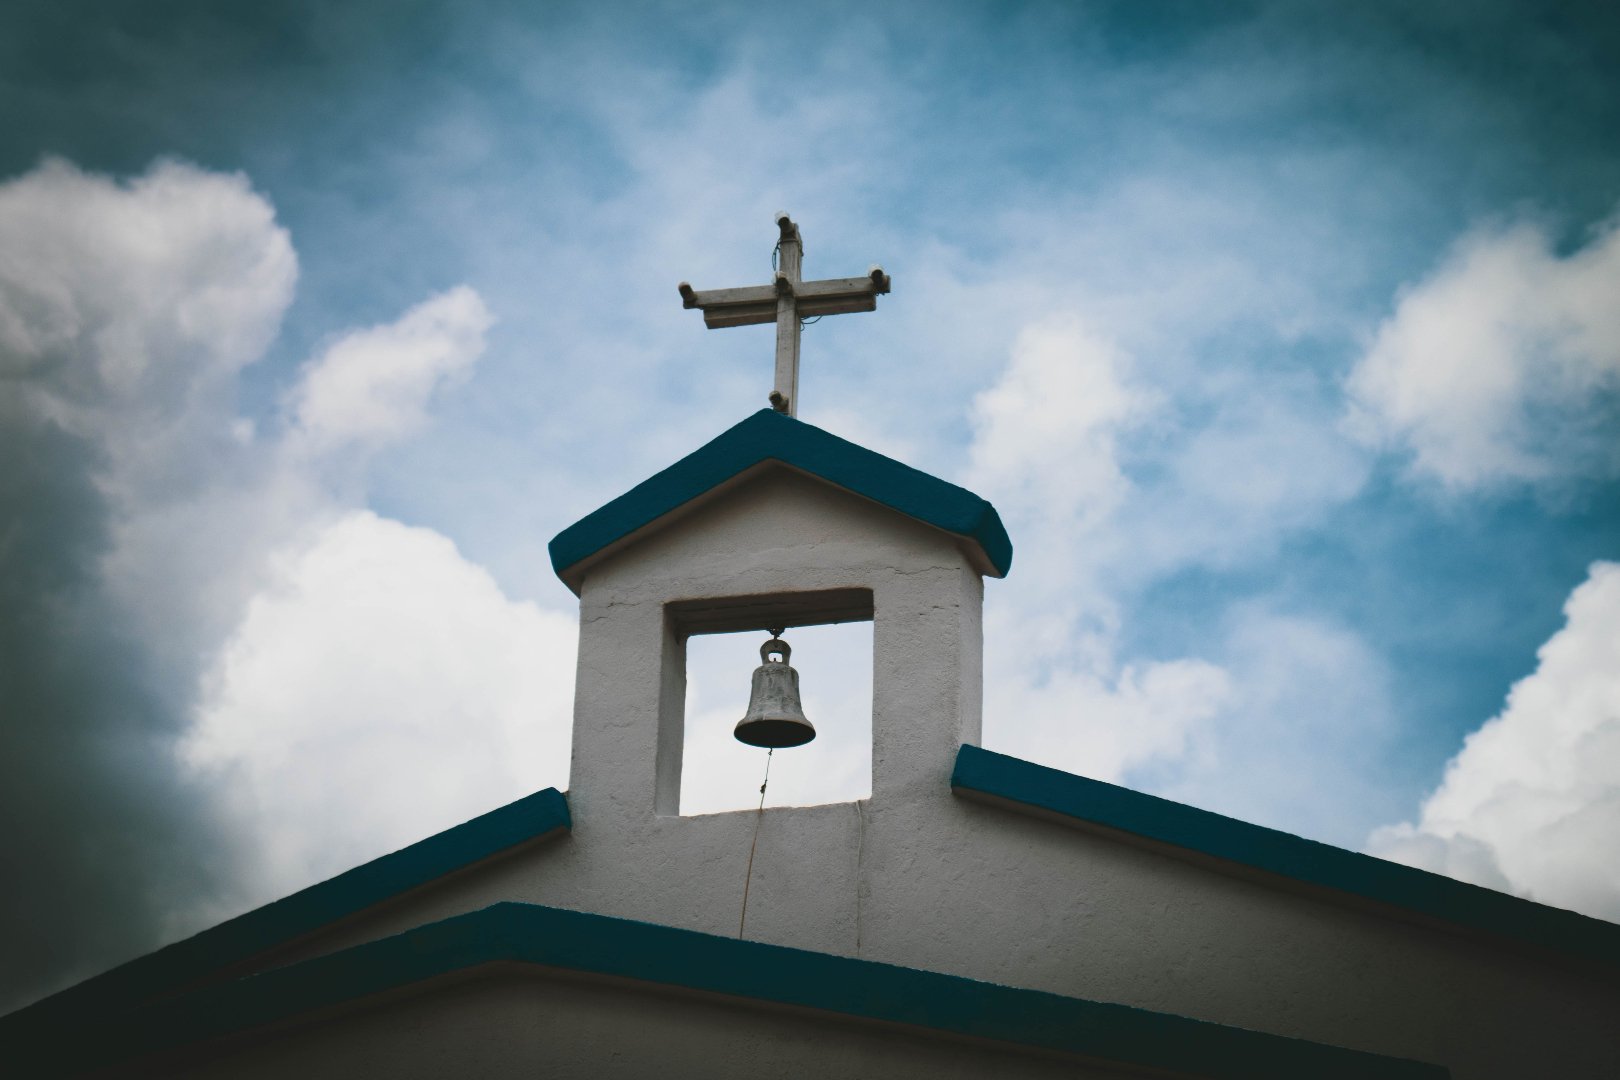 church steeple with bell and cross